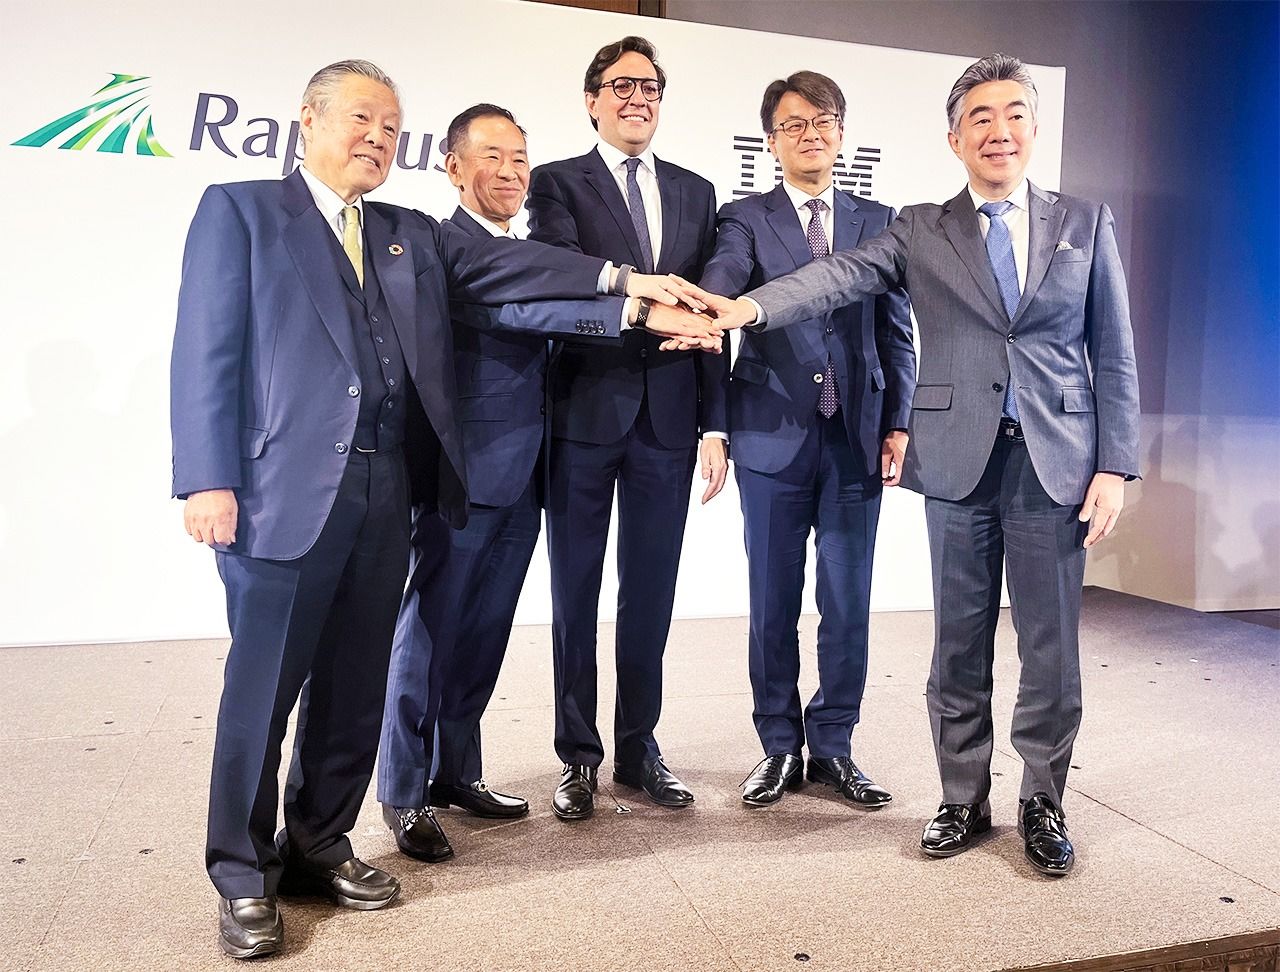 (From left) Chairman Higashi Tetsurō and President Koike Atsuyoshi of Rapidus Corp. pose with Senior Vice President Dario Gil of IBM and General Manager Yamaguchi Akio and Chief Technology Officer Morimoto Norishige of IBM Japan at a press conference announcing a semiconductor partnership, Tokyo, December 13, 2022. (© Jiji)